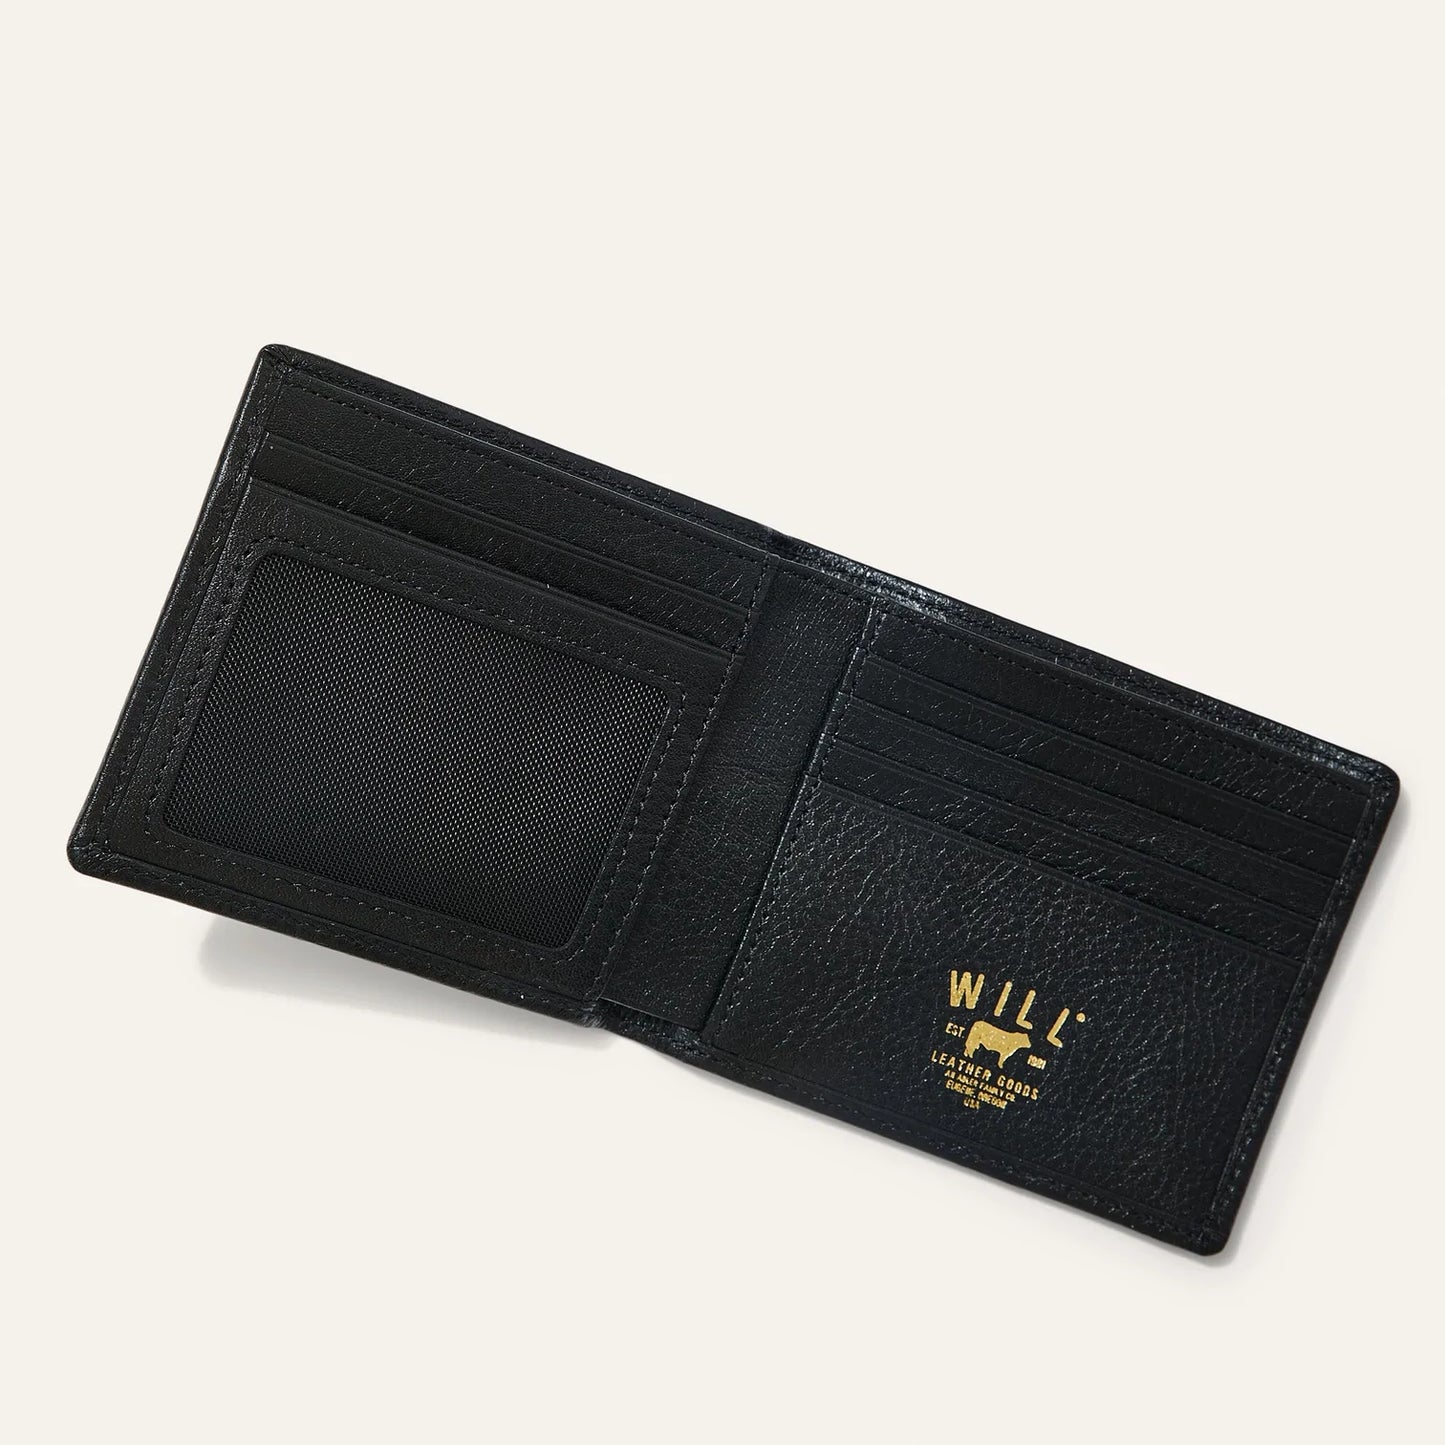 Will Leather Goods Classic Billfold Black